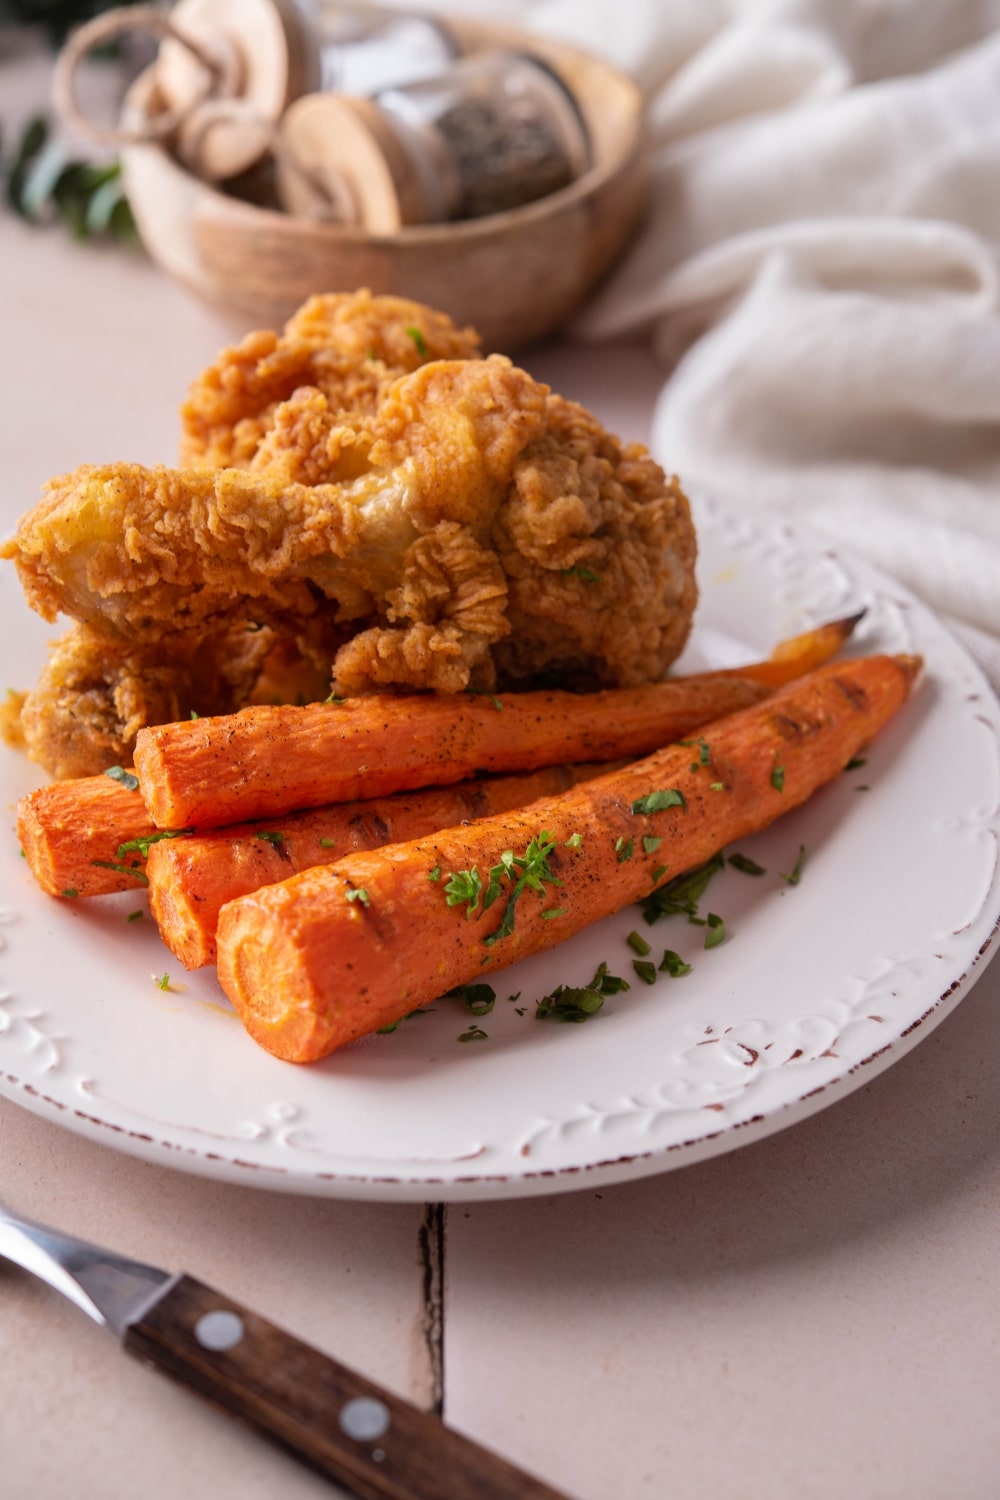 Grilled carrots and fried chicken served on a white plate.